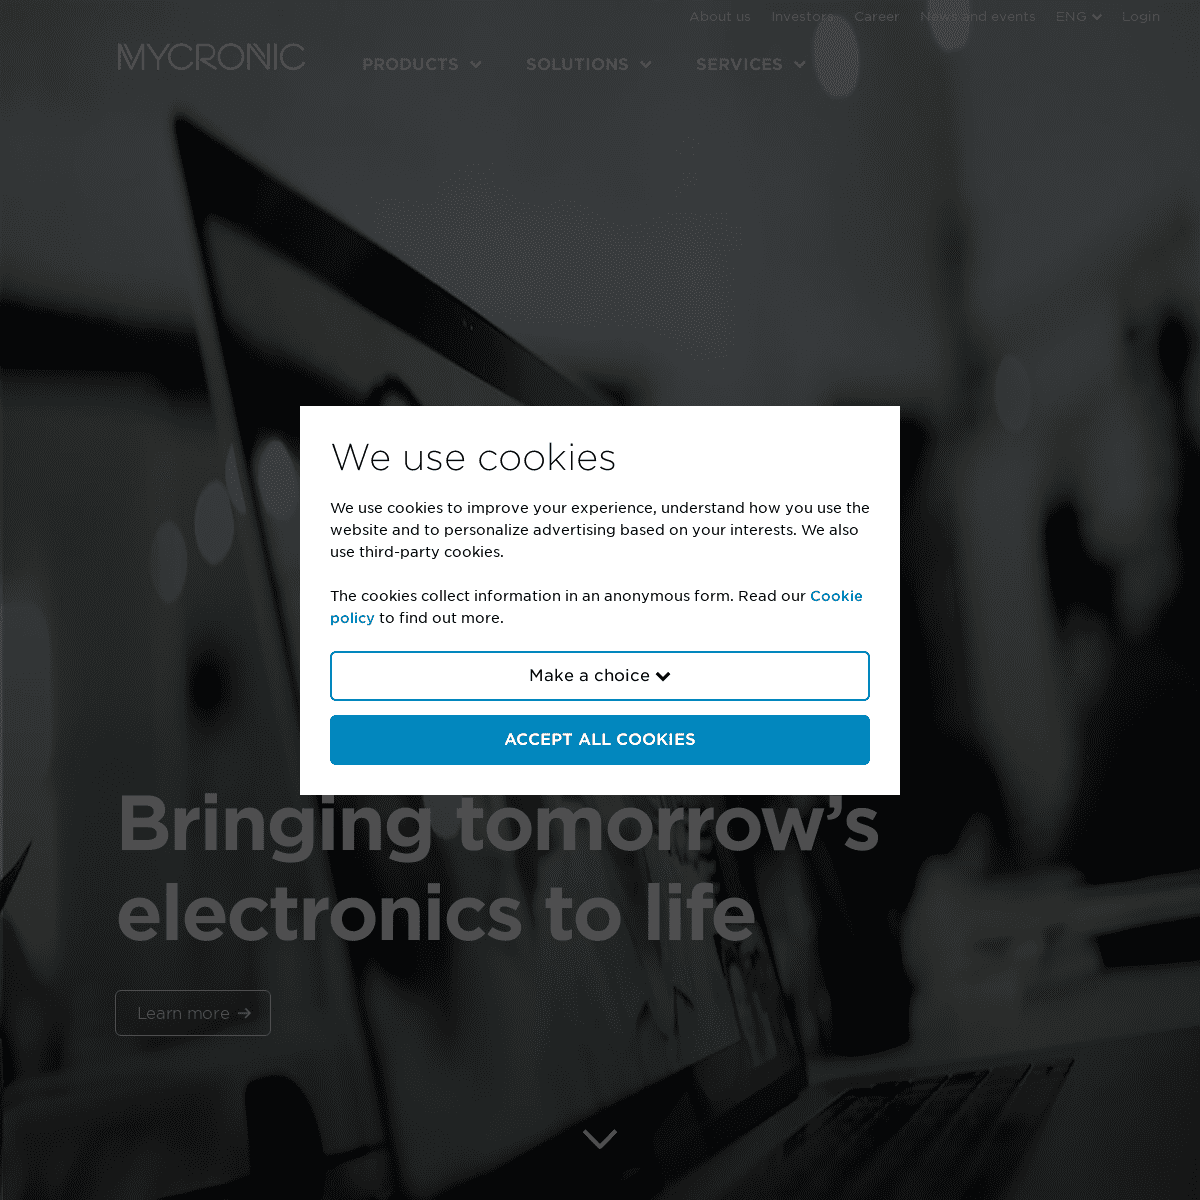 A complete backup of https://mycronic.com